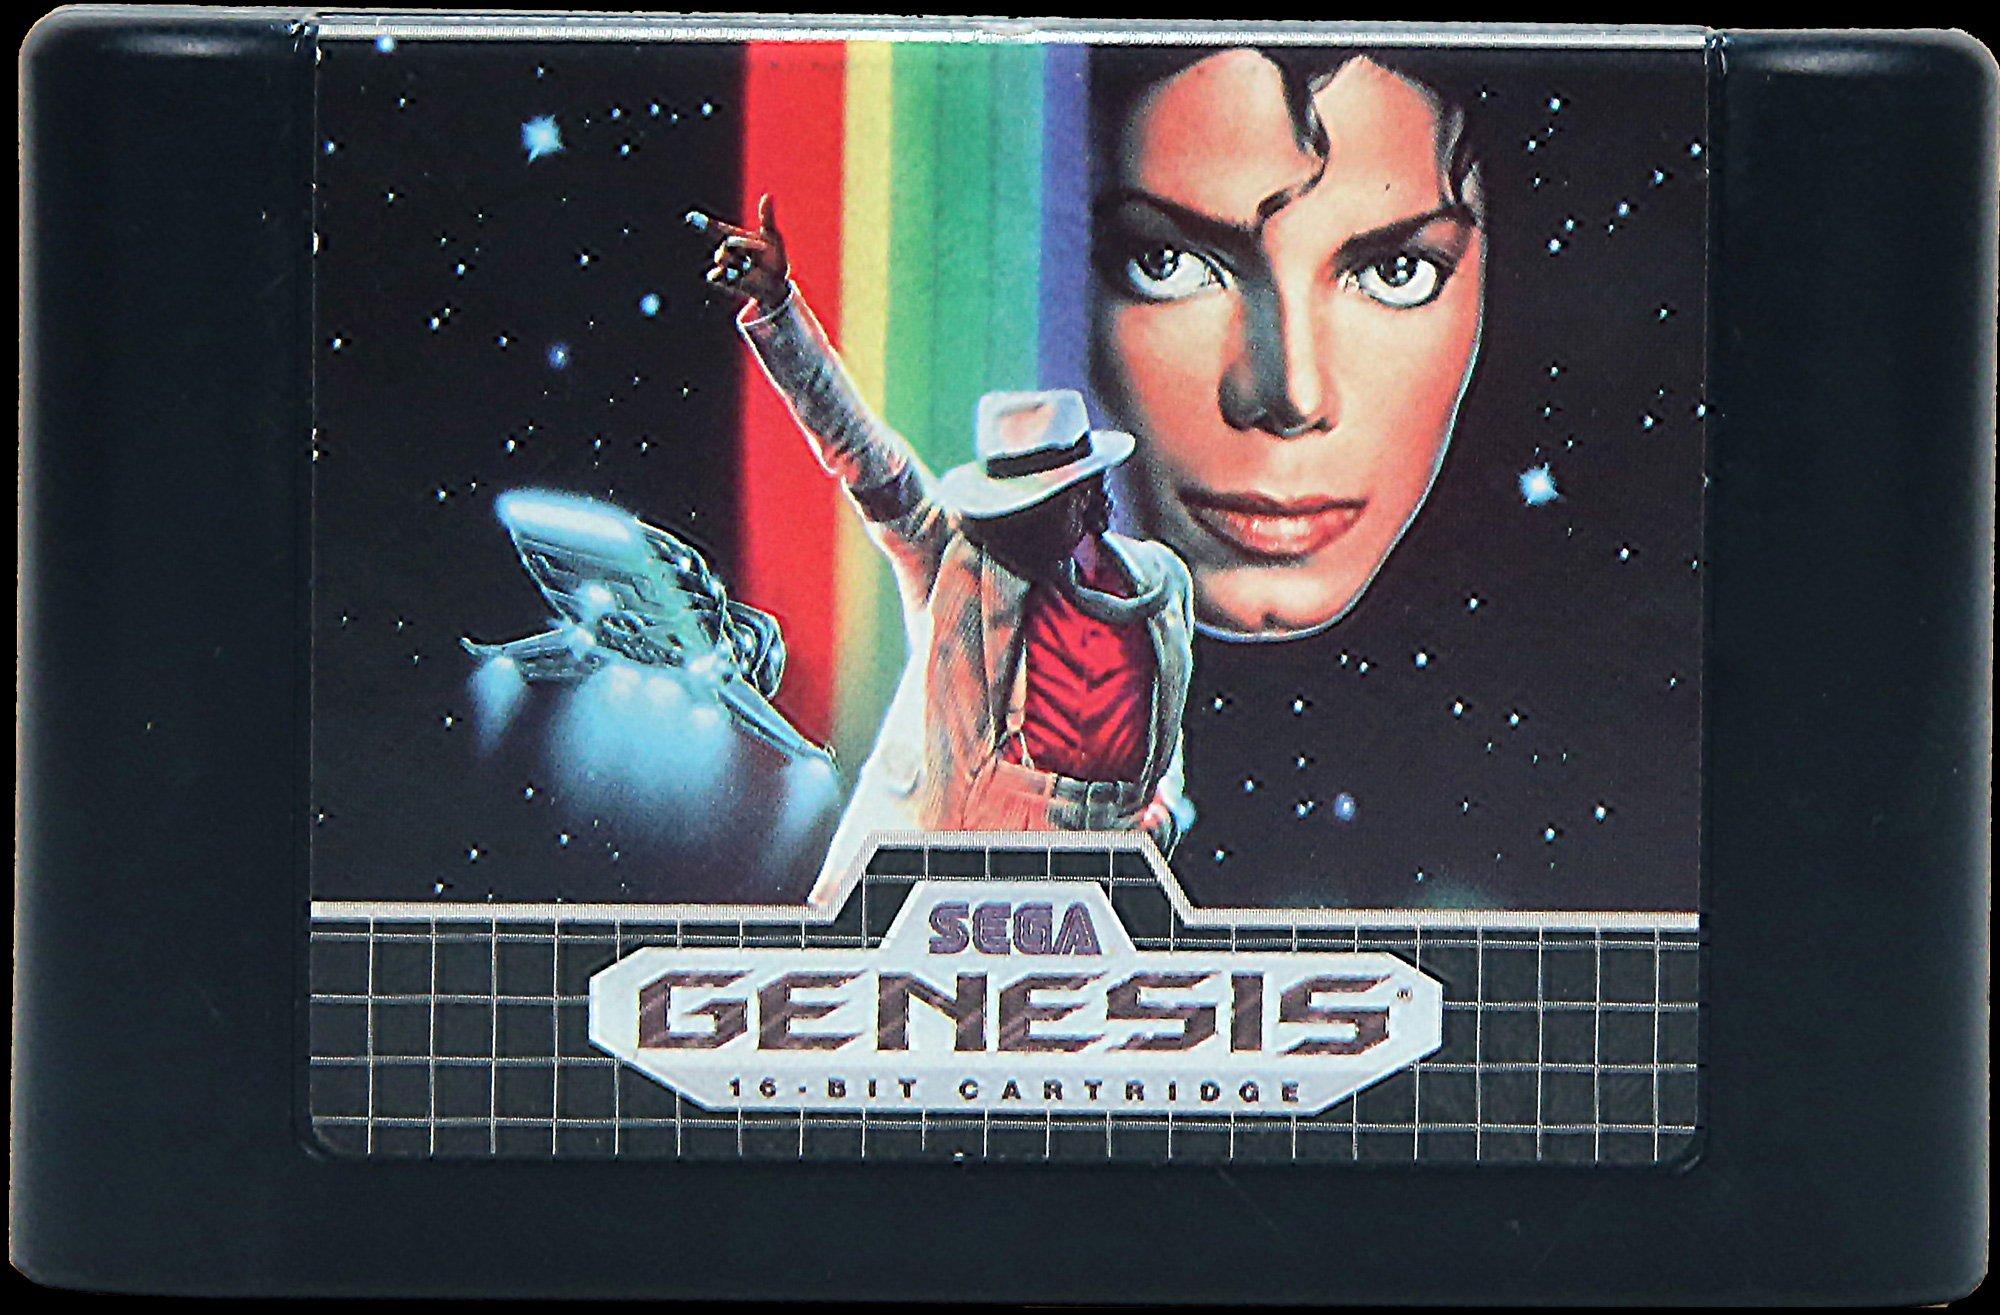 terrible voice samples from classic games - Moonwalker